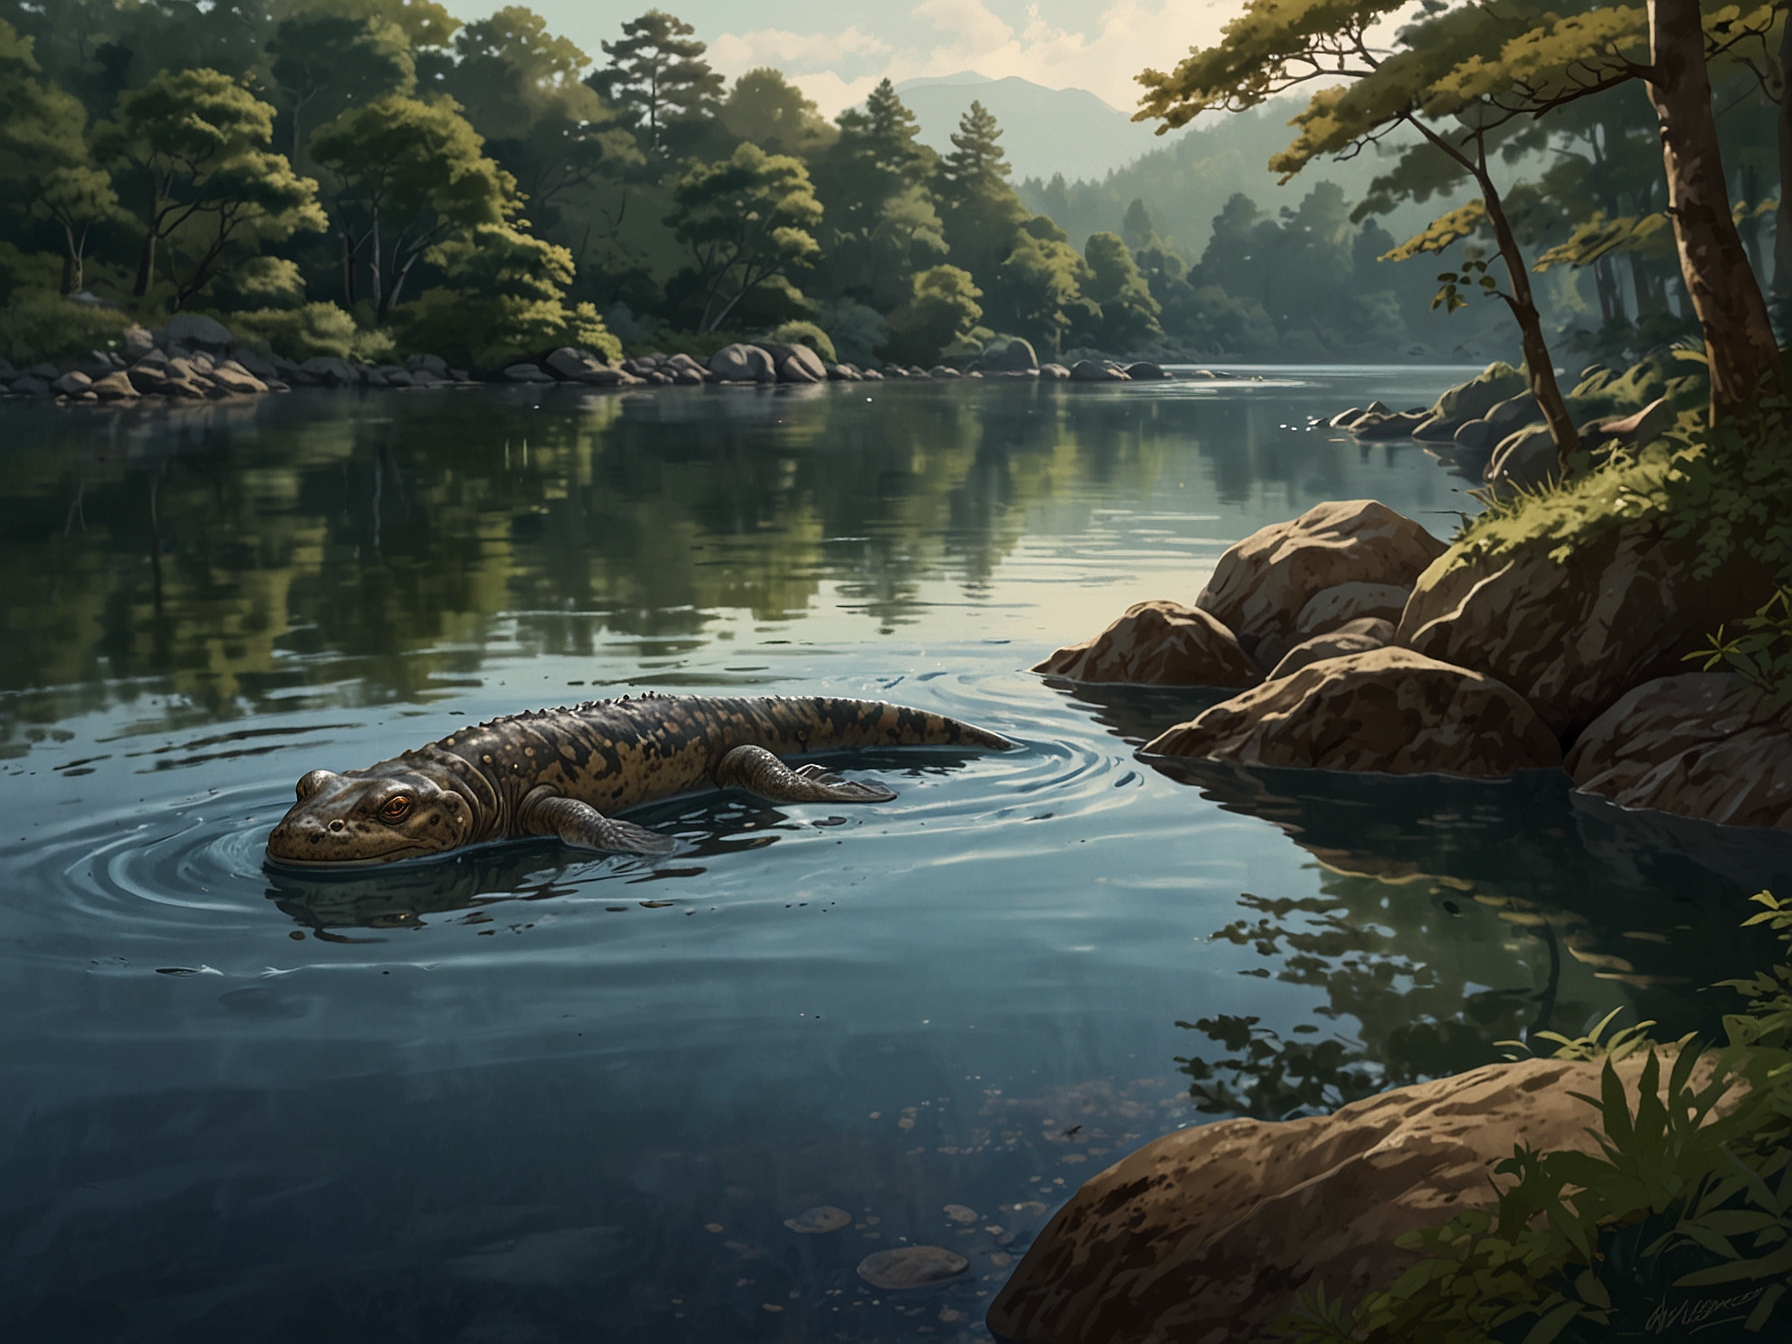 A serene river in Japan with a large Japanese giant salamander swimming peacefully, symbolizing resilience as part of a conservation effort to save these nearly extinct creatures.